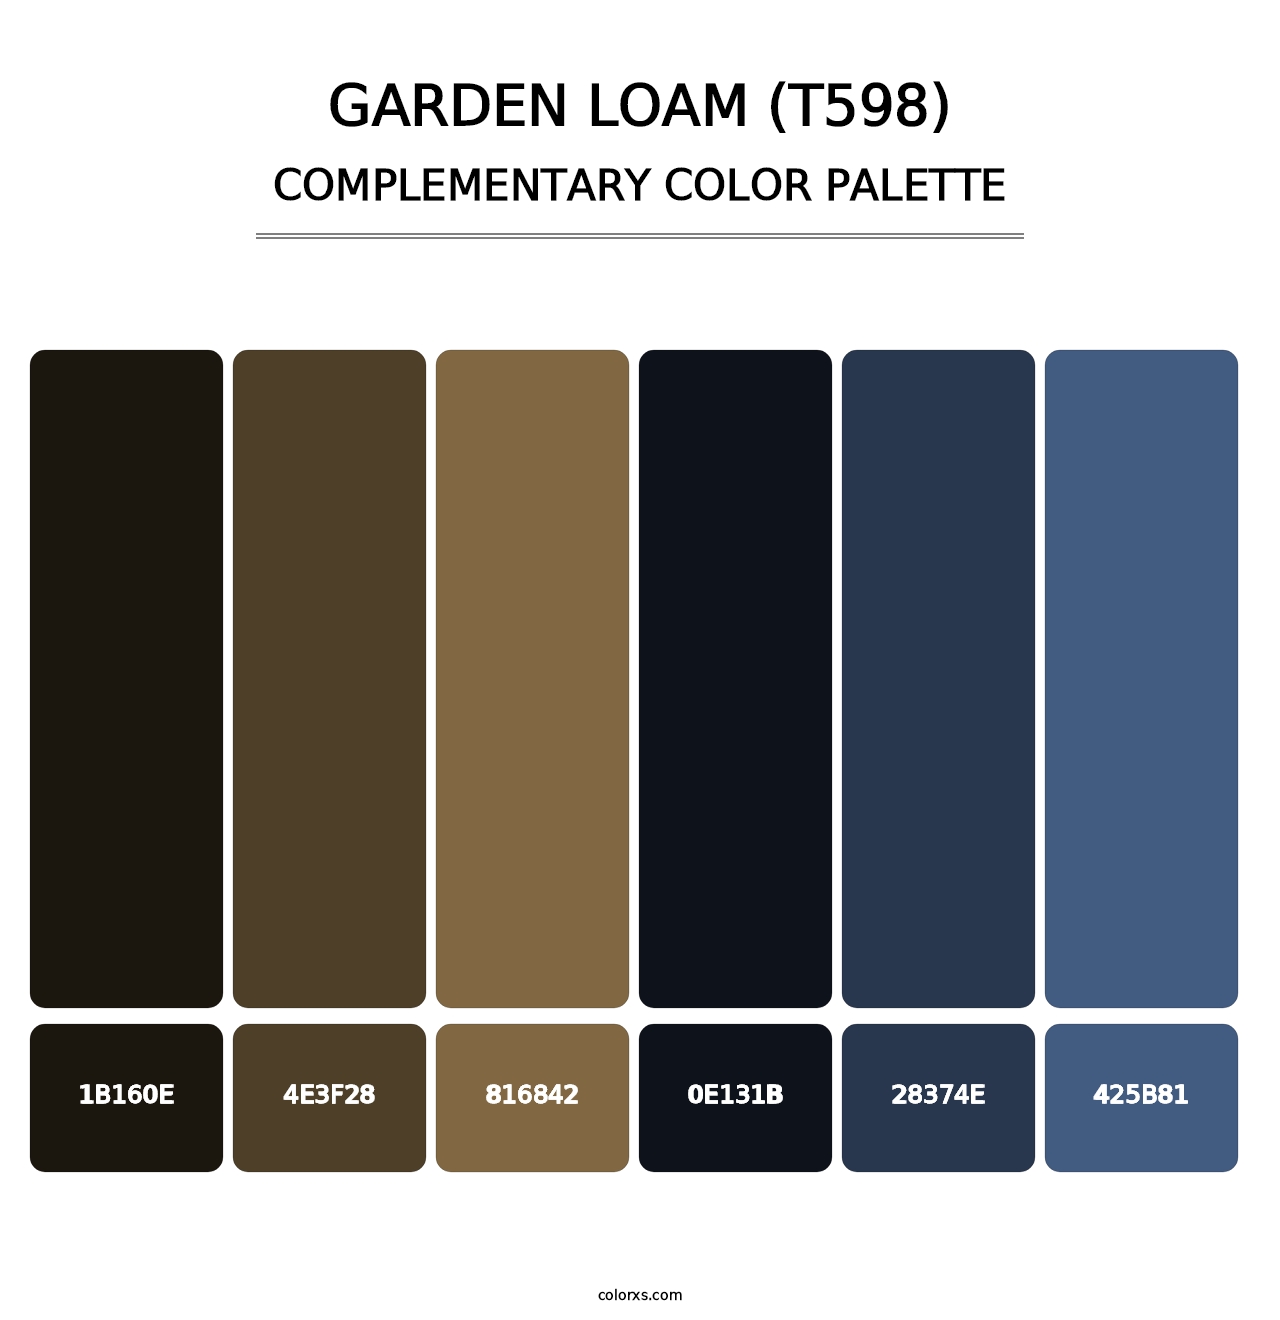 Garden Loam (T598) - Complementary Color Palette